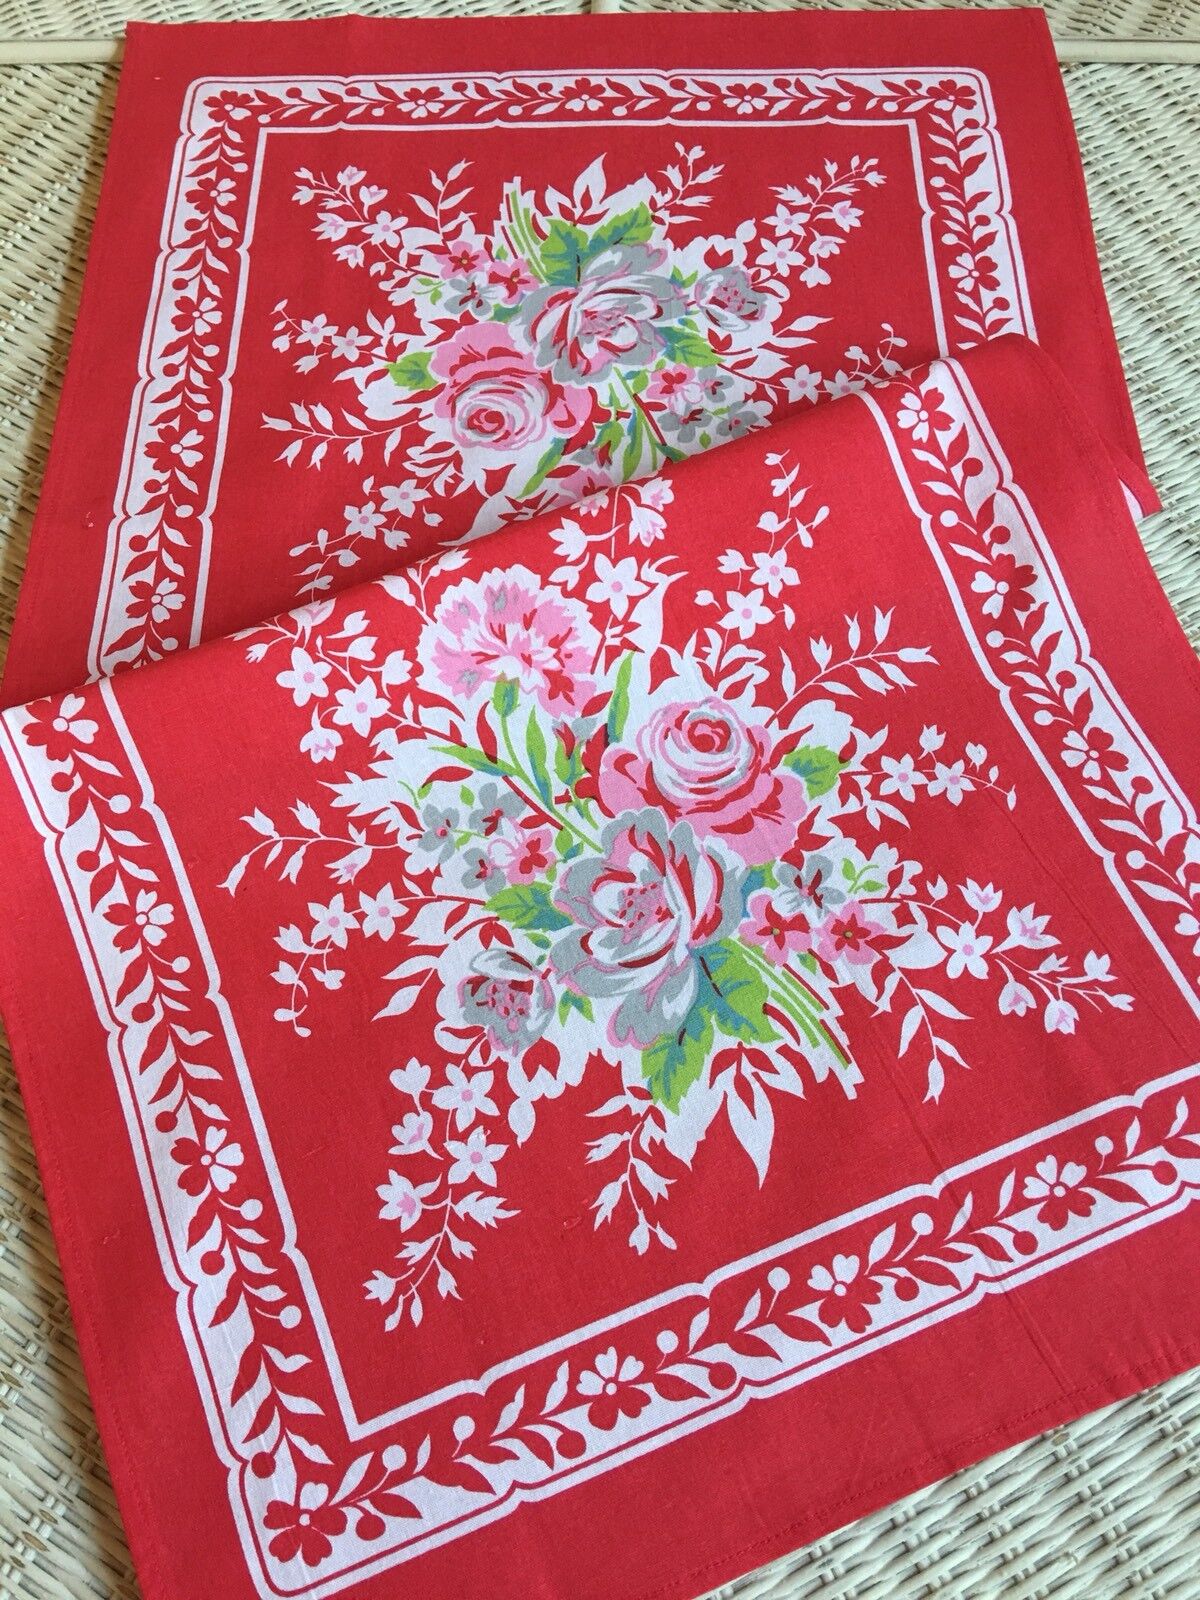 New LuRay Vintage Style Pretty Kitchen Tea Towel - Beautiful RED Floral Print